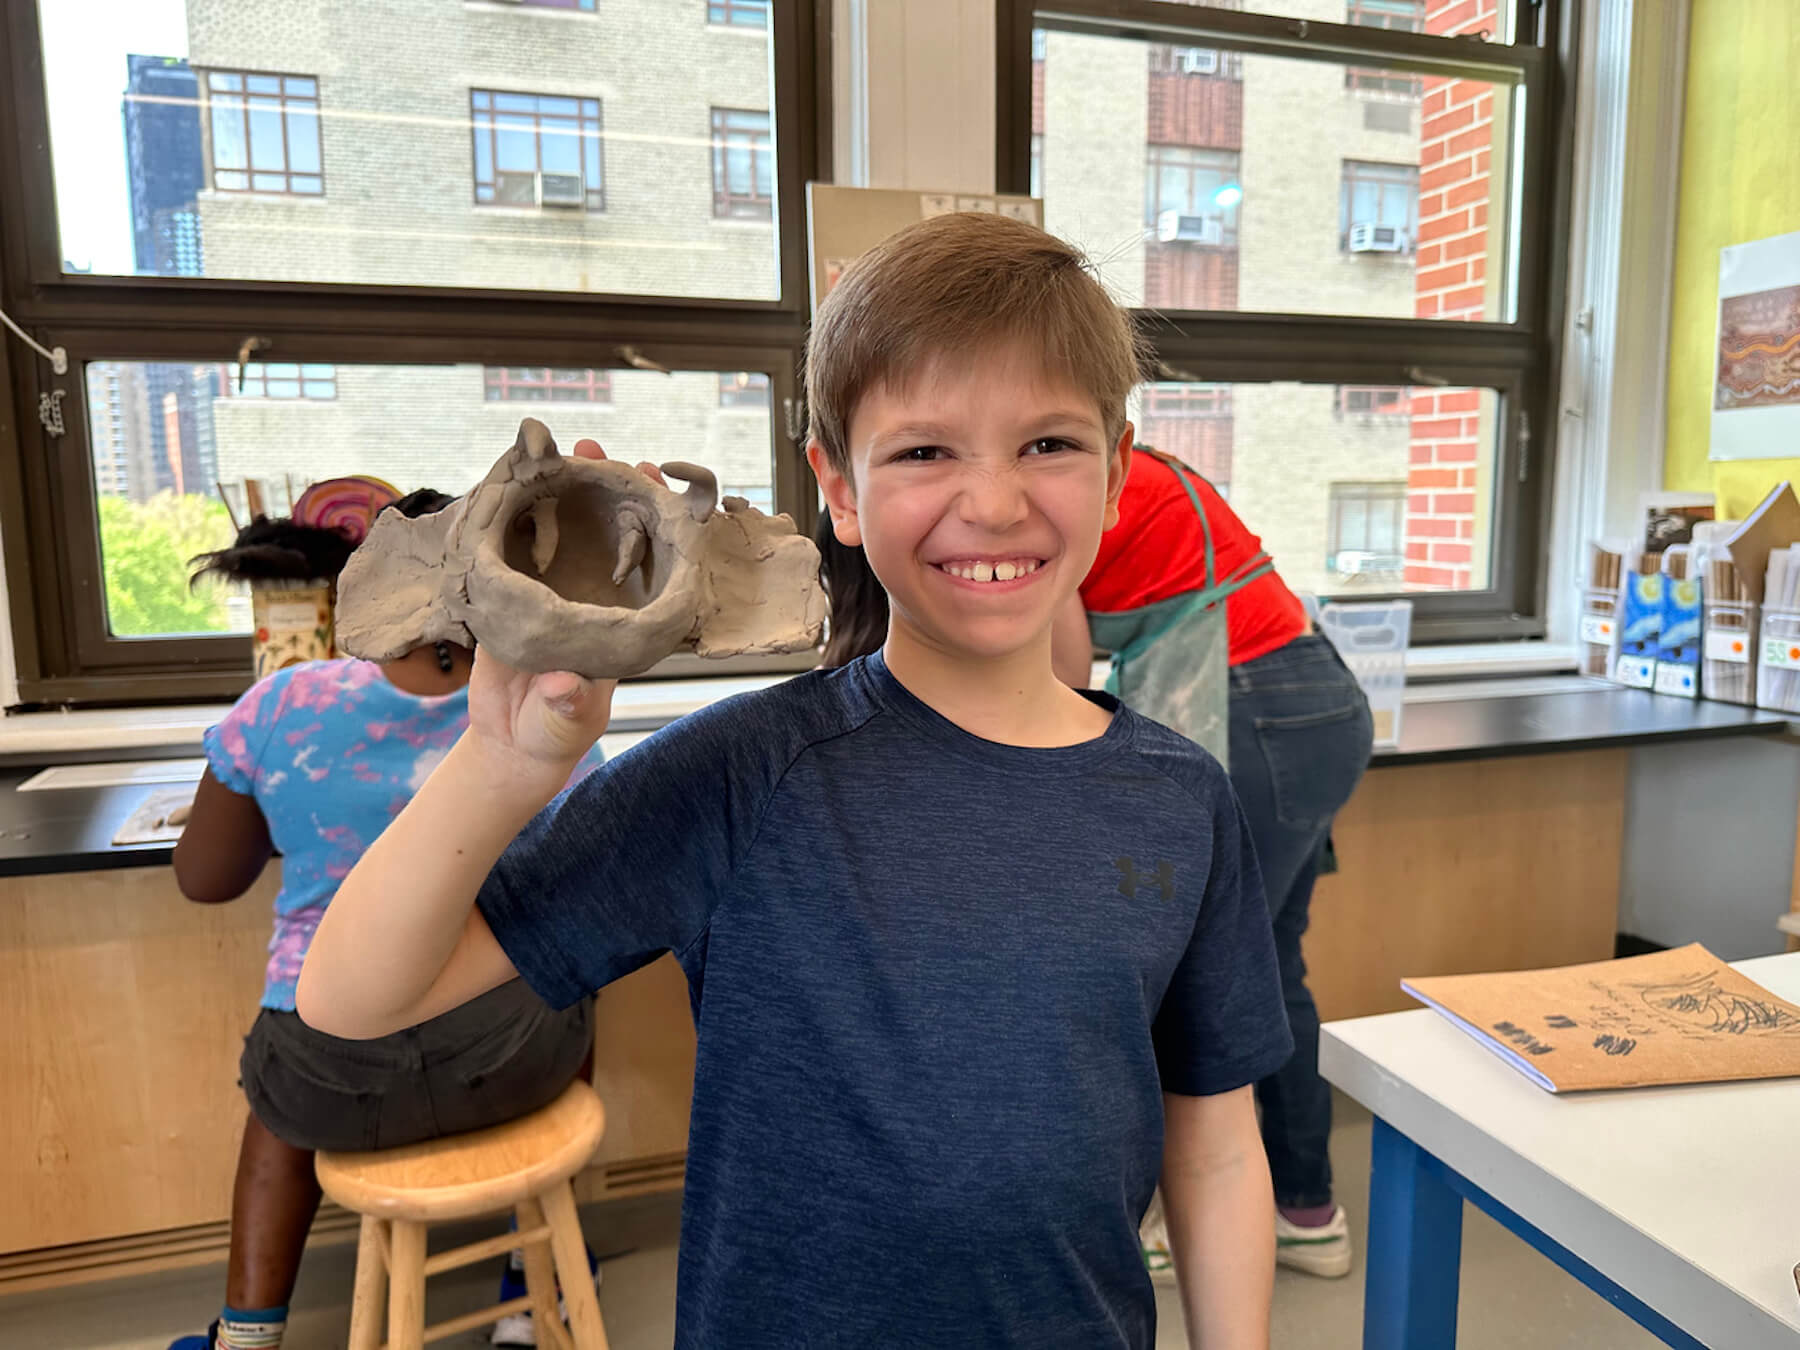 Ethical Culture student smiles and poses with his ceramics project in progress.